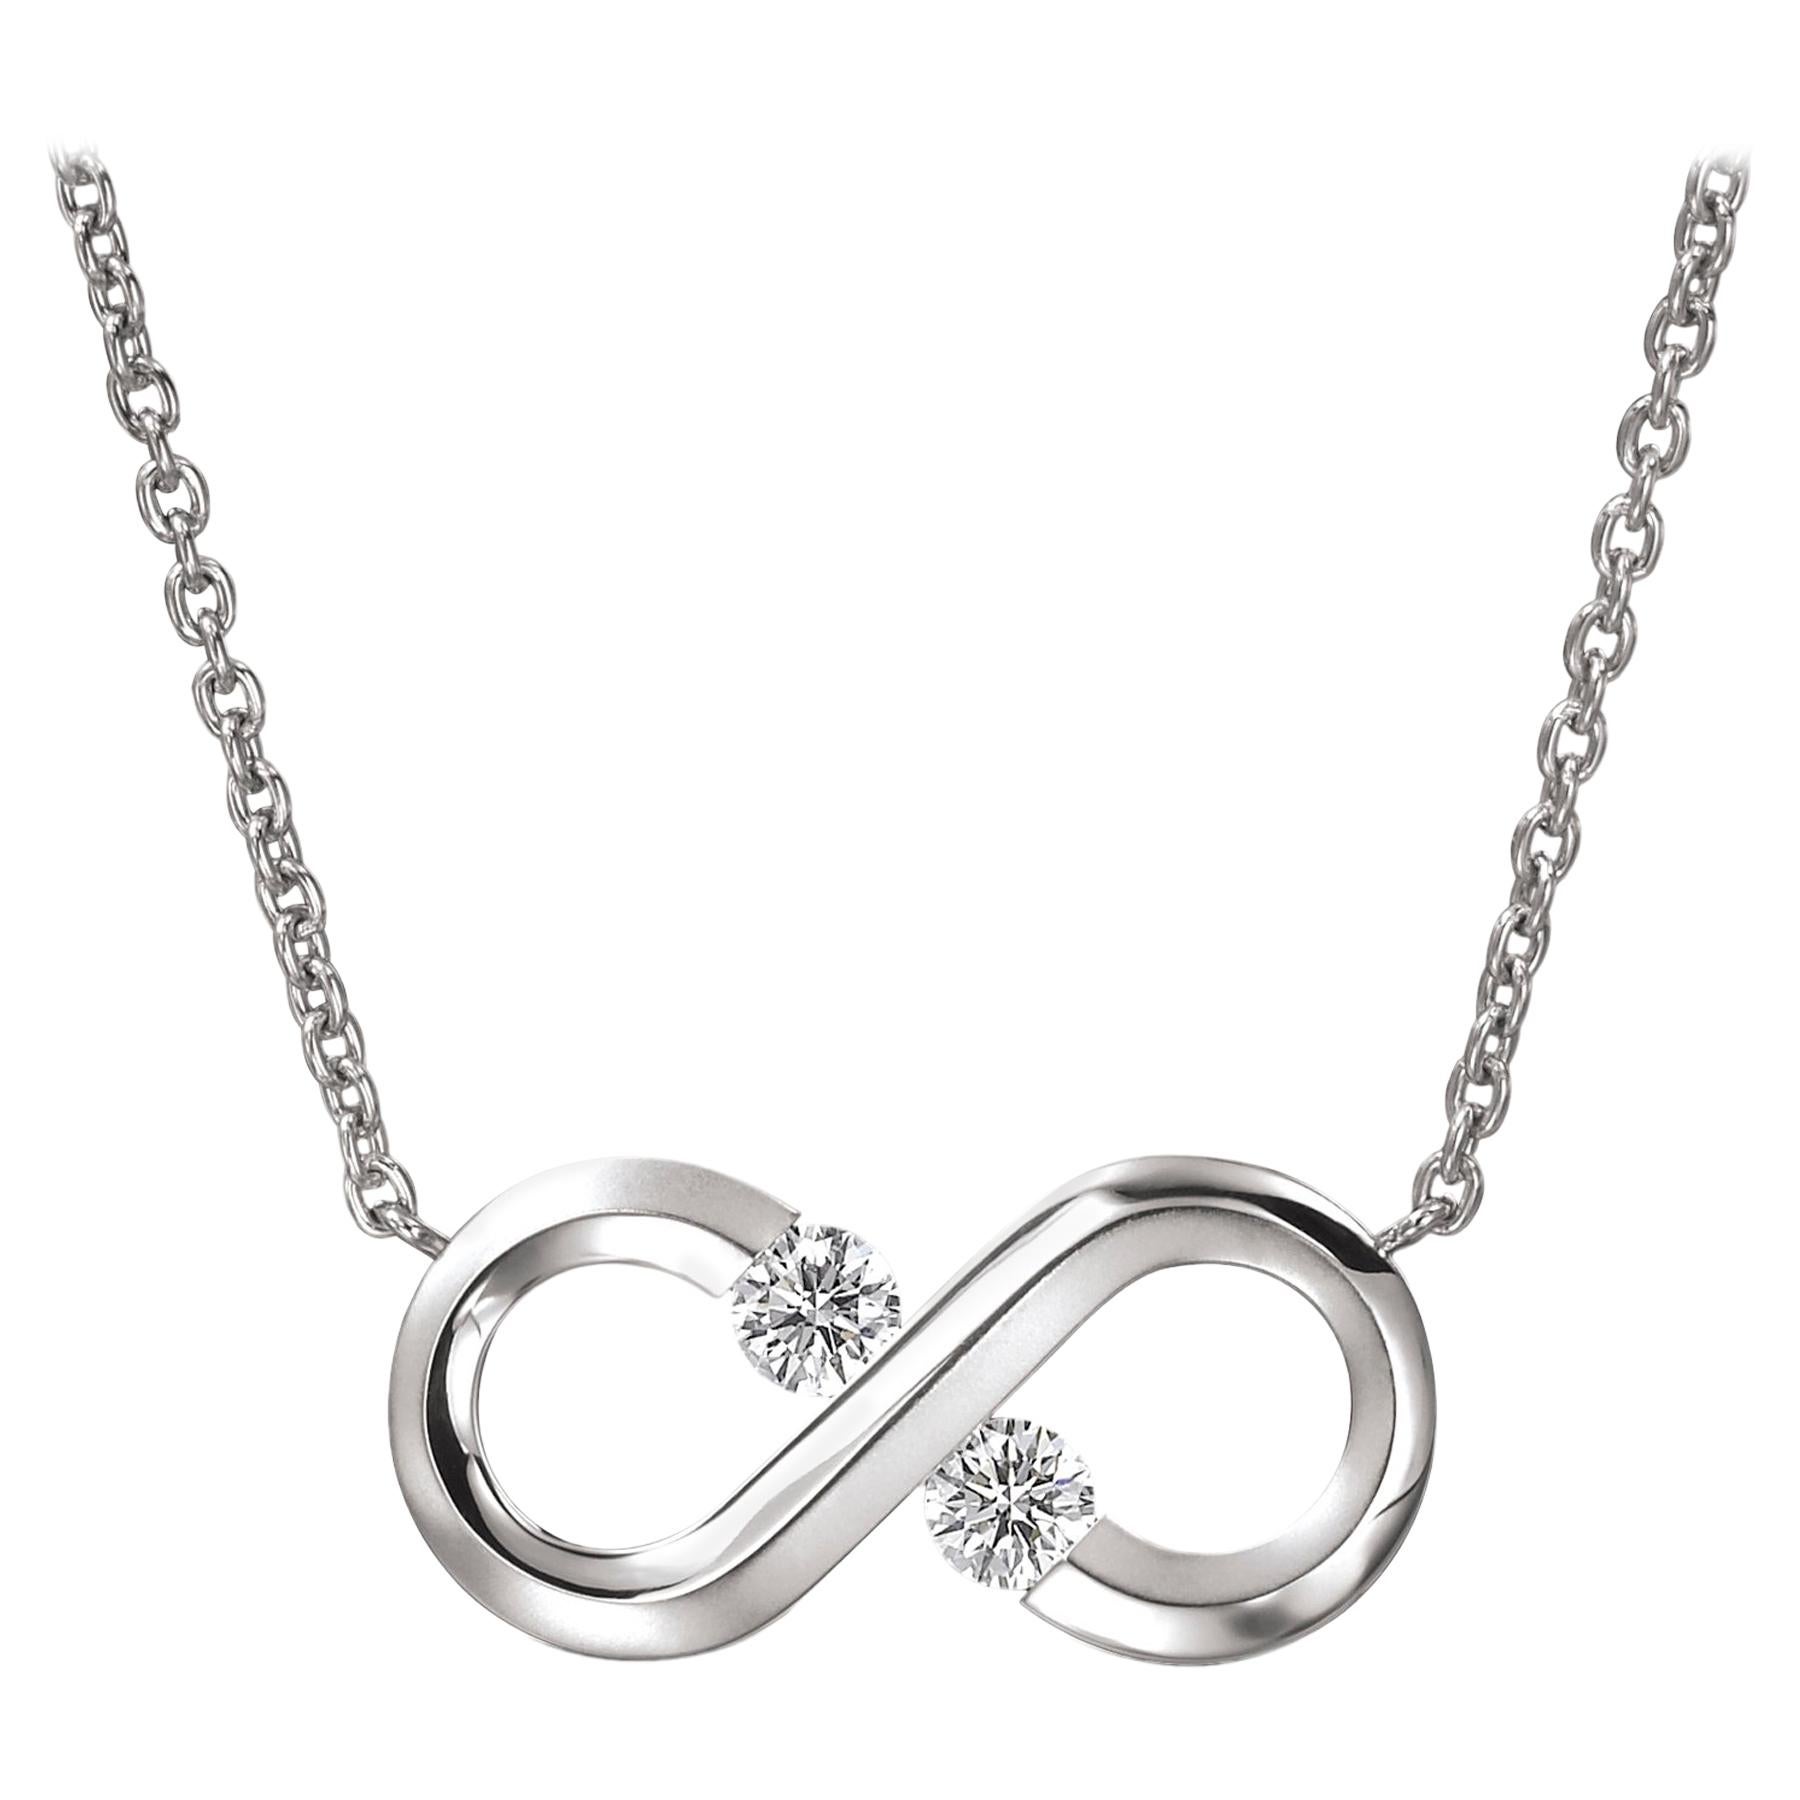 Steven Kretchmer Small Horizontal Infinity Necklace with Tension-Set Diamonds